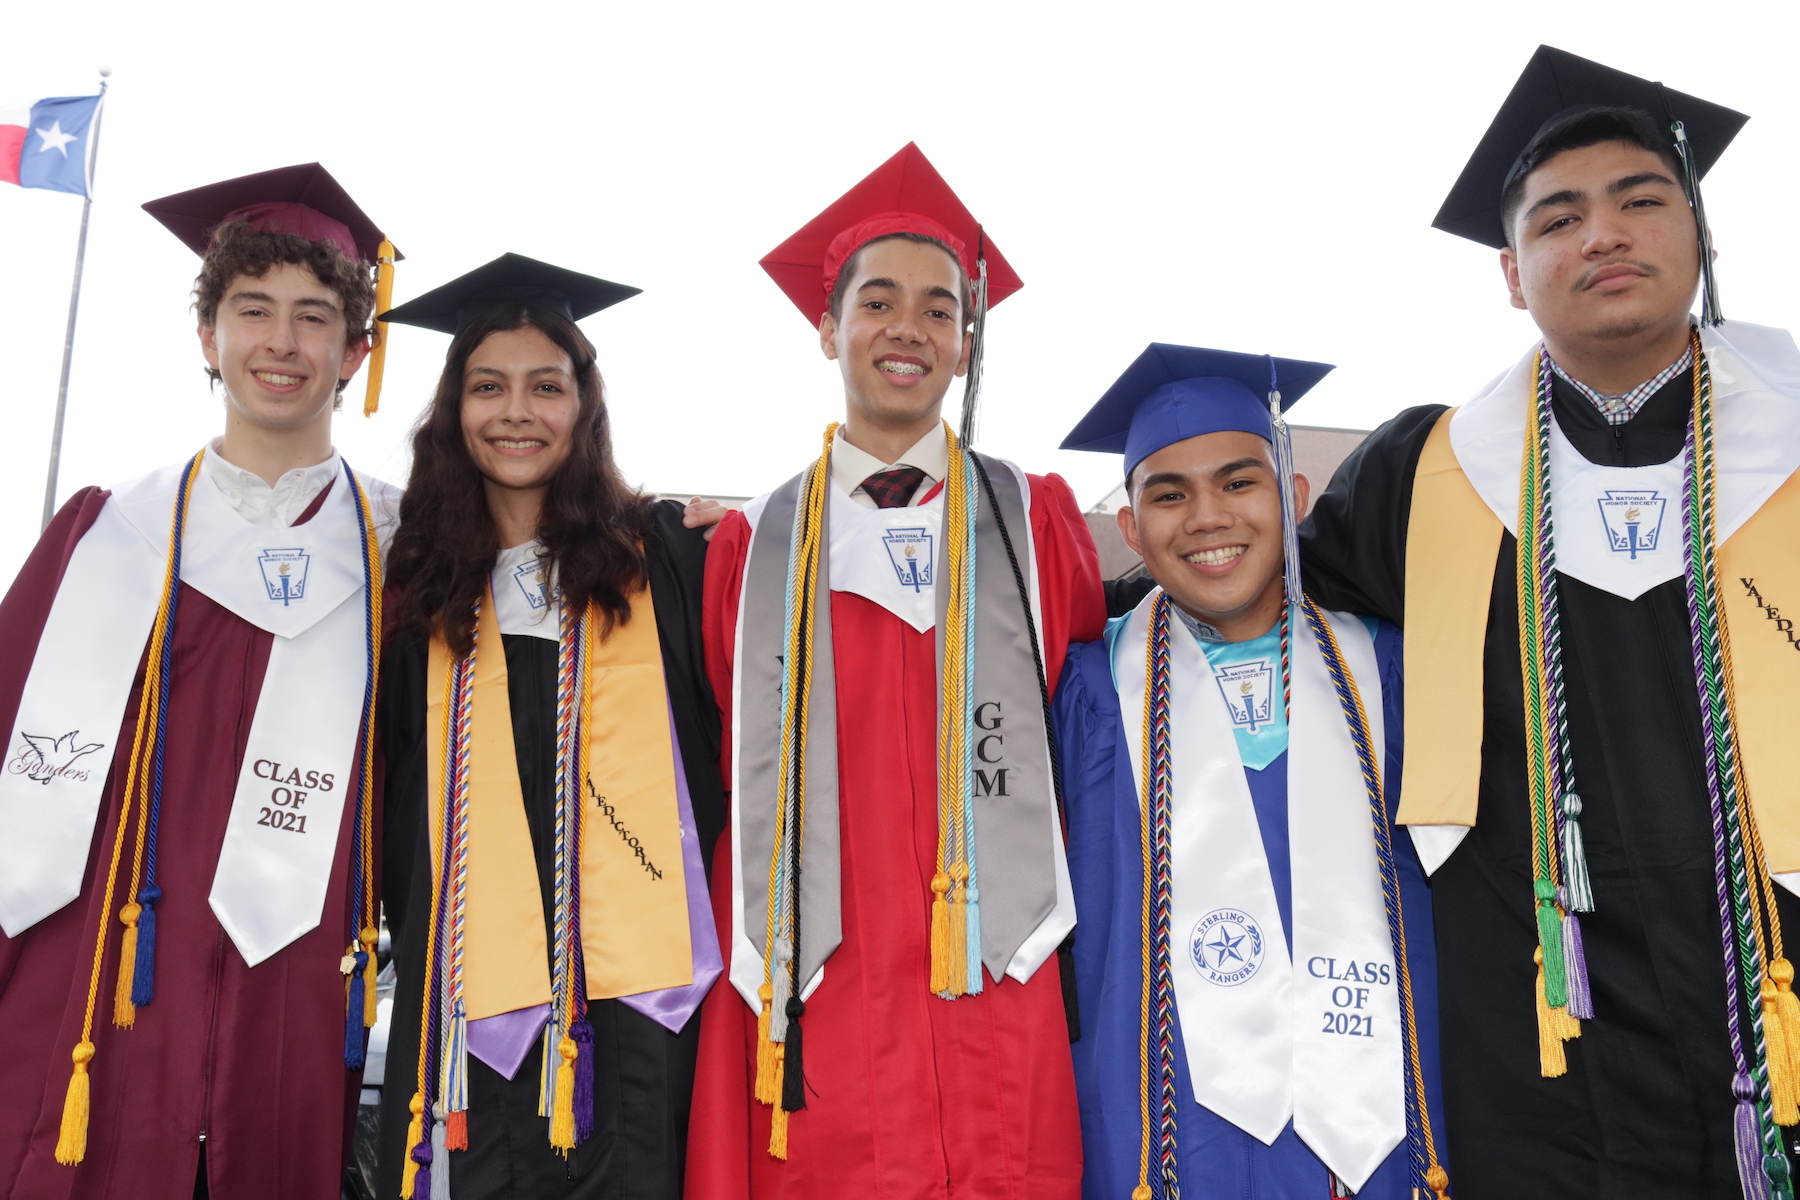 valedictorians from each high school pose together